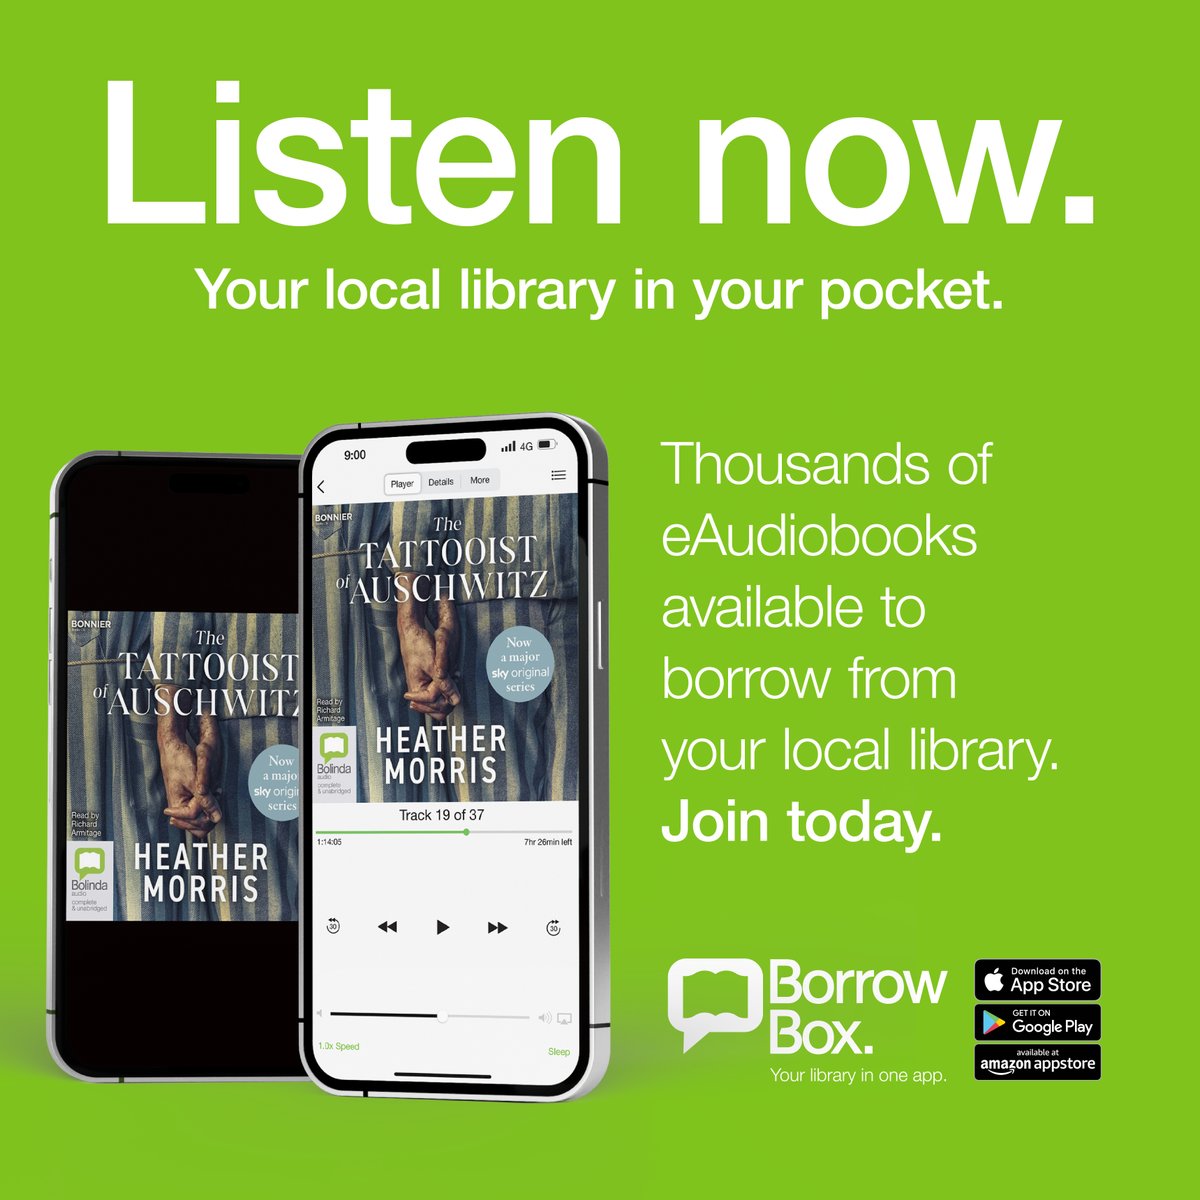 This week's BorrowBox Unlimited release is Heather Morris' The Tattooist of Auschwitz It's available both as an eBook and eAudiobook and you can download either format straightaway via the FREE #BorrowBox app. No need to reserve or queue for the title for the next 60 days!